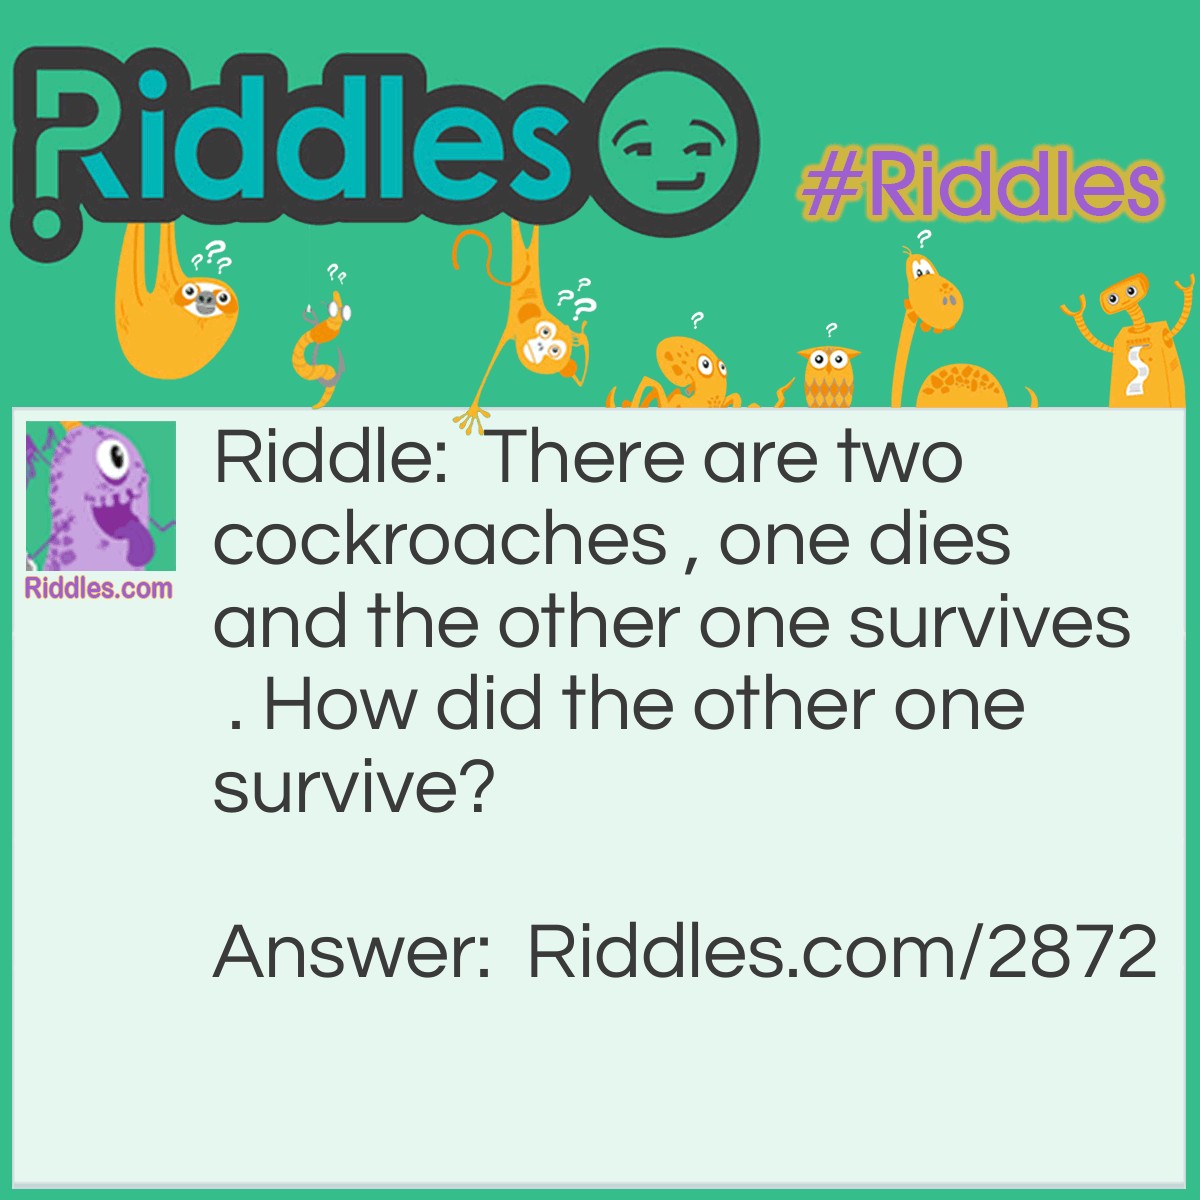 Riddle: There are two cockroaches , one dies and the other one survives. How did the other one survive? Answer: A women adopted it.